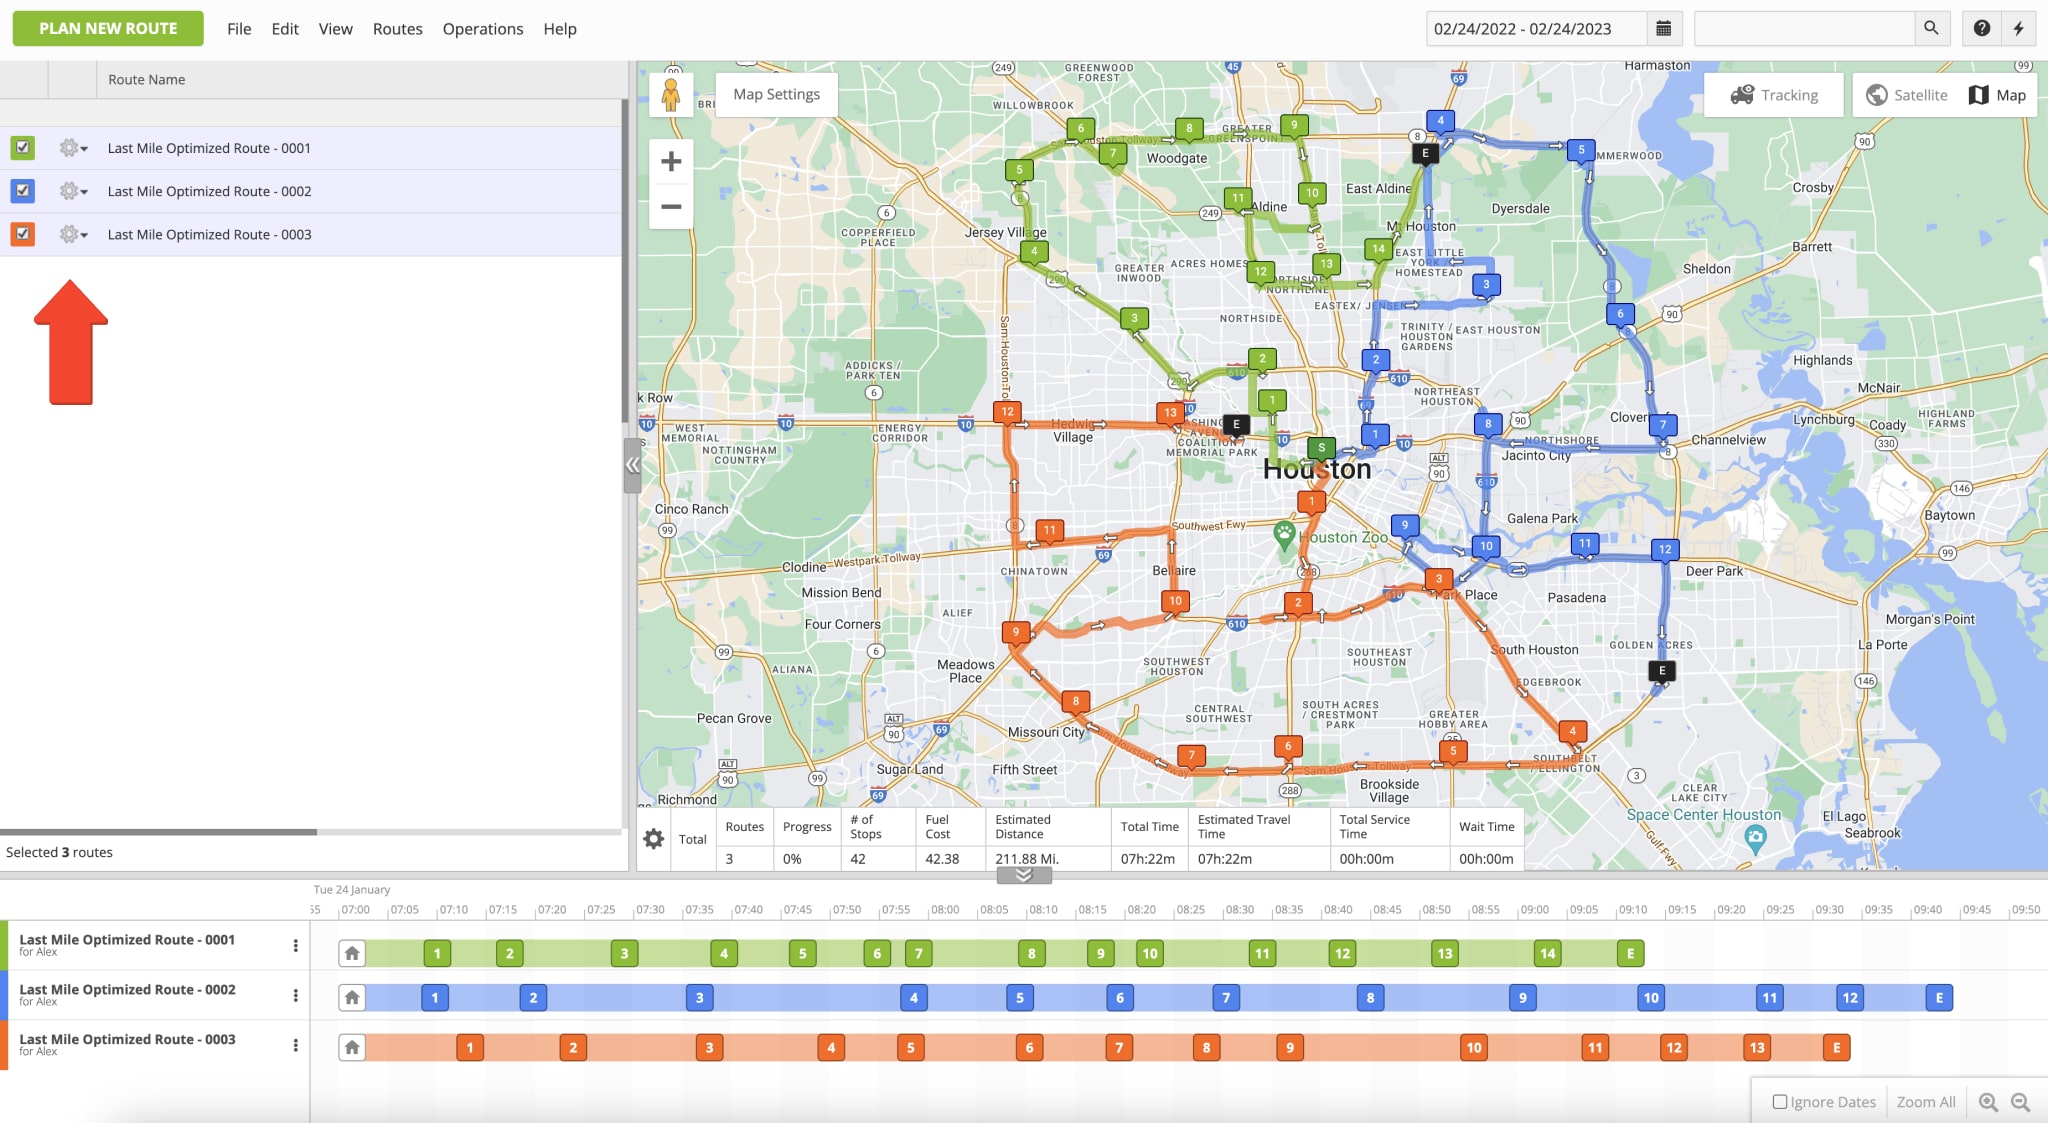 Route4Me optimizes routes with delivery orders based on route optimization constraints and order details.